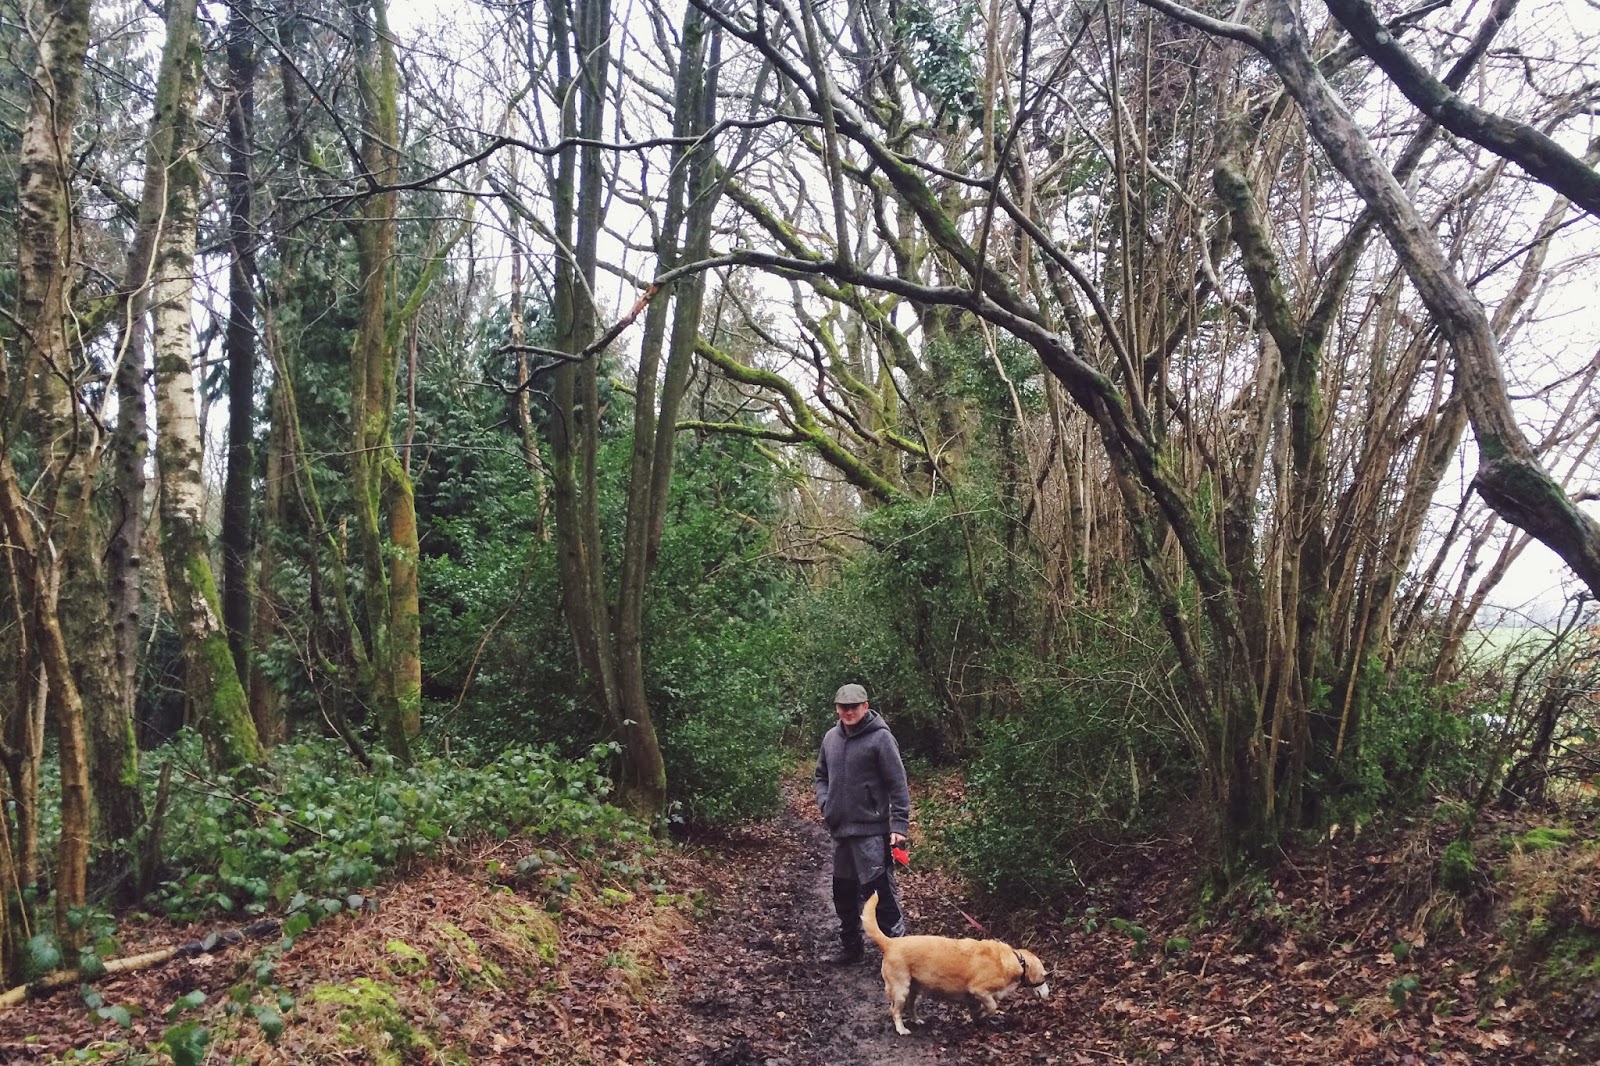 FashionFake, a UK fashion and lifestyle blog. Sundays are best spent relaxing and being cosy - and us country bumpkins love a long walk in the woods before a roast! Read about how we keep warm and happy whilst tough mudding in Hampshire.